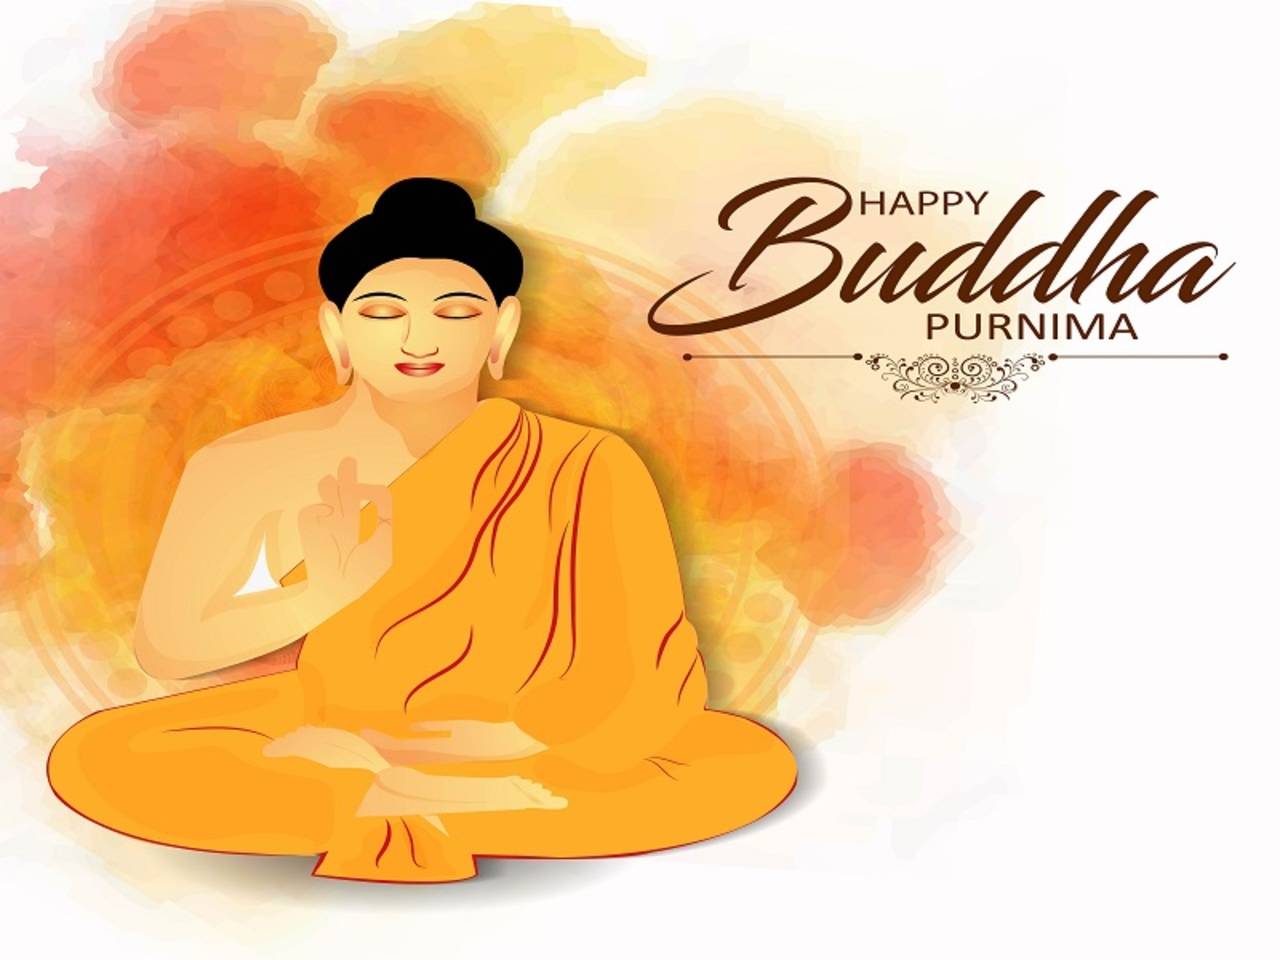 Happy Buddha Purnima 2020: Inspirational Quotes, Wishes, Messages ...